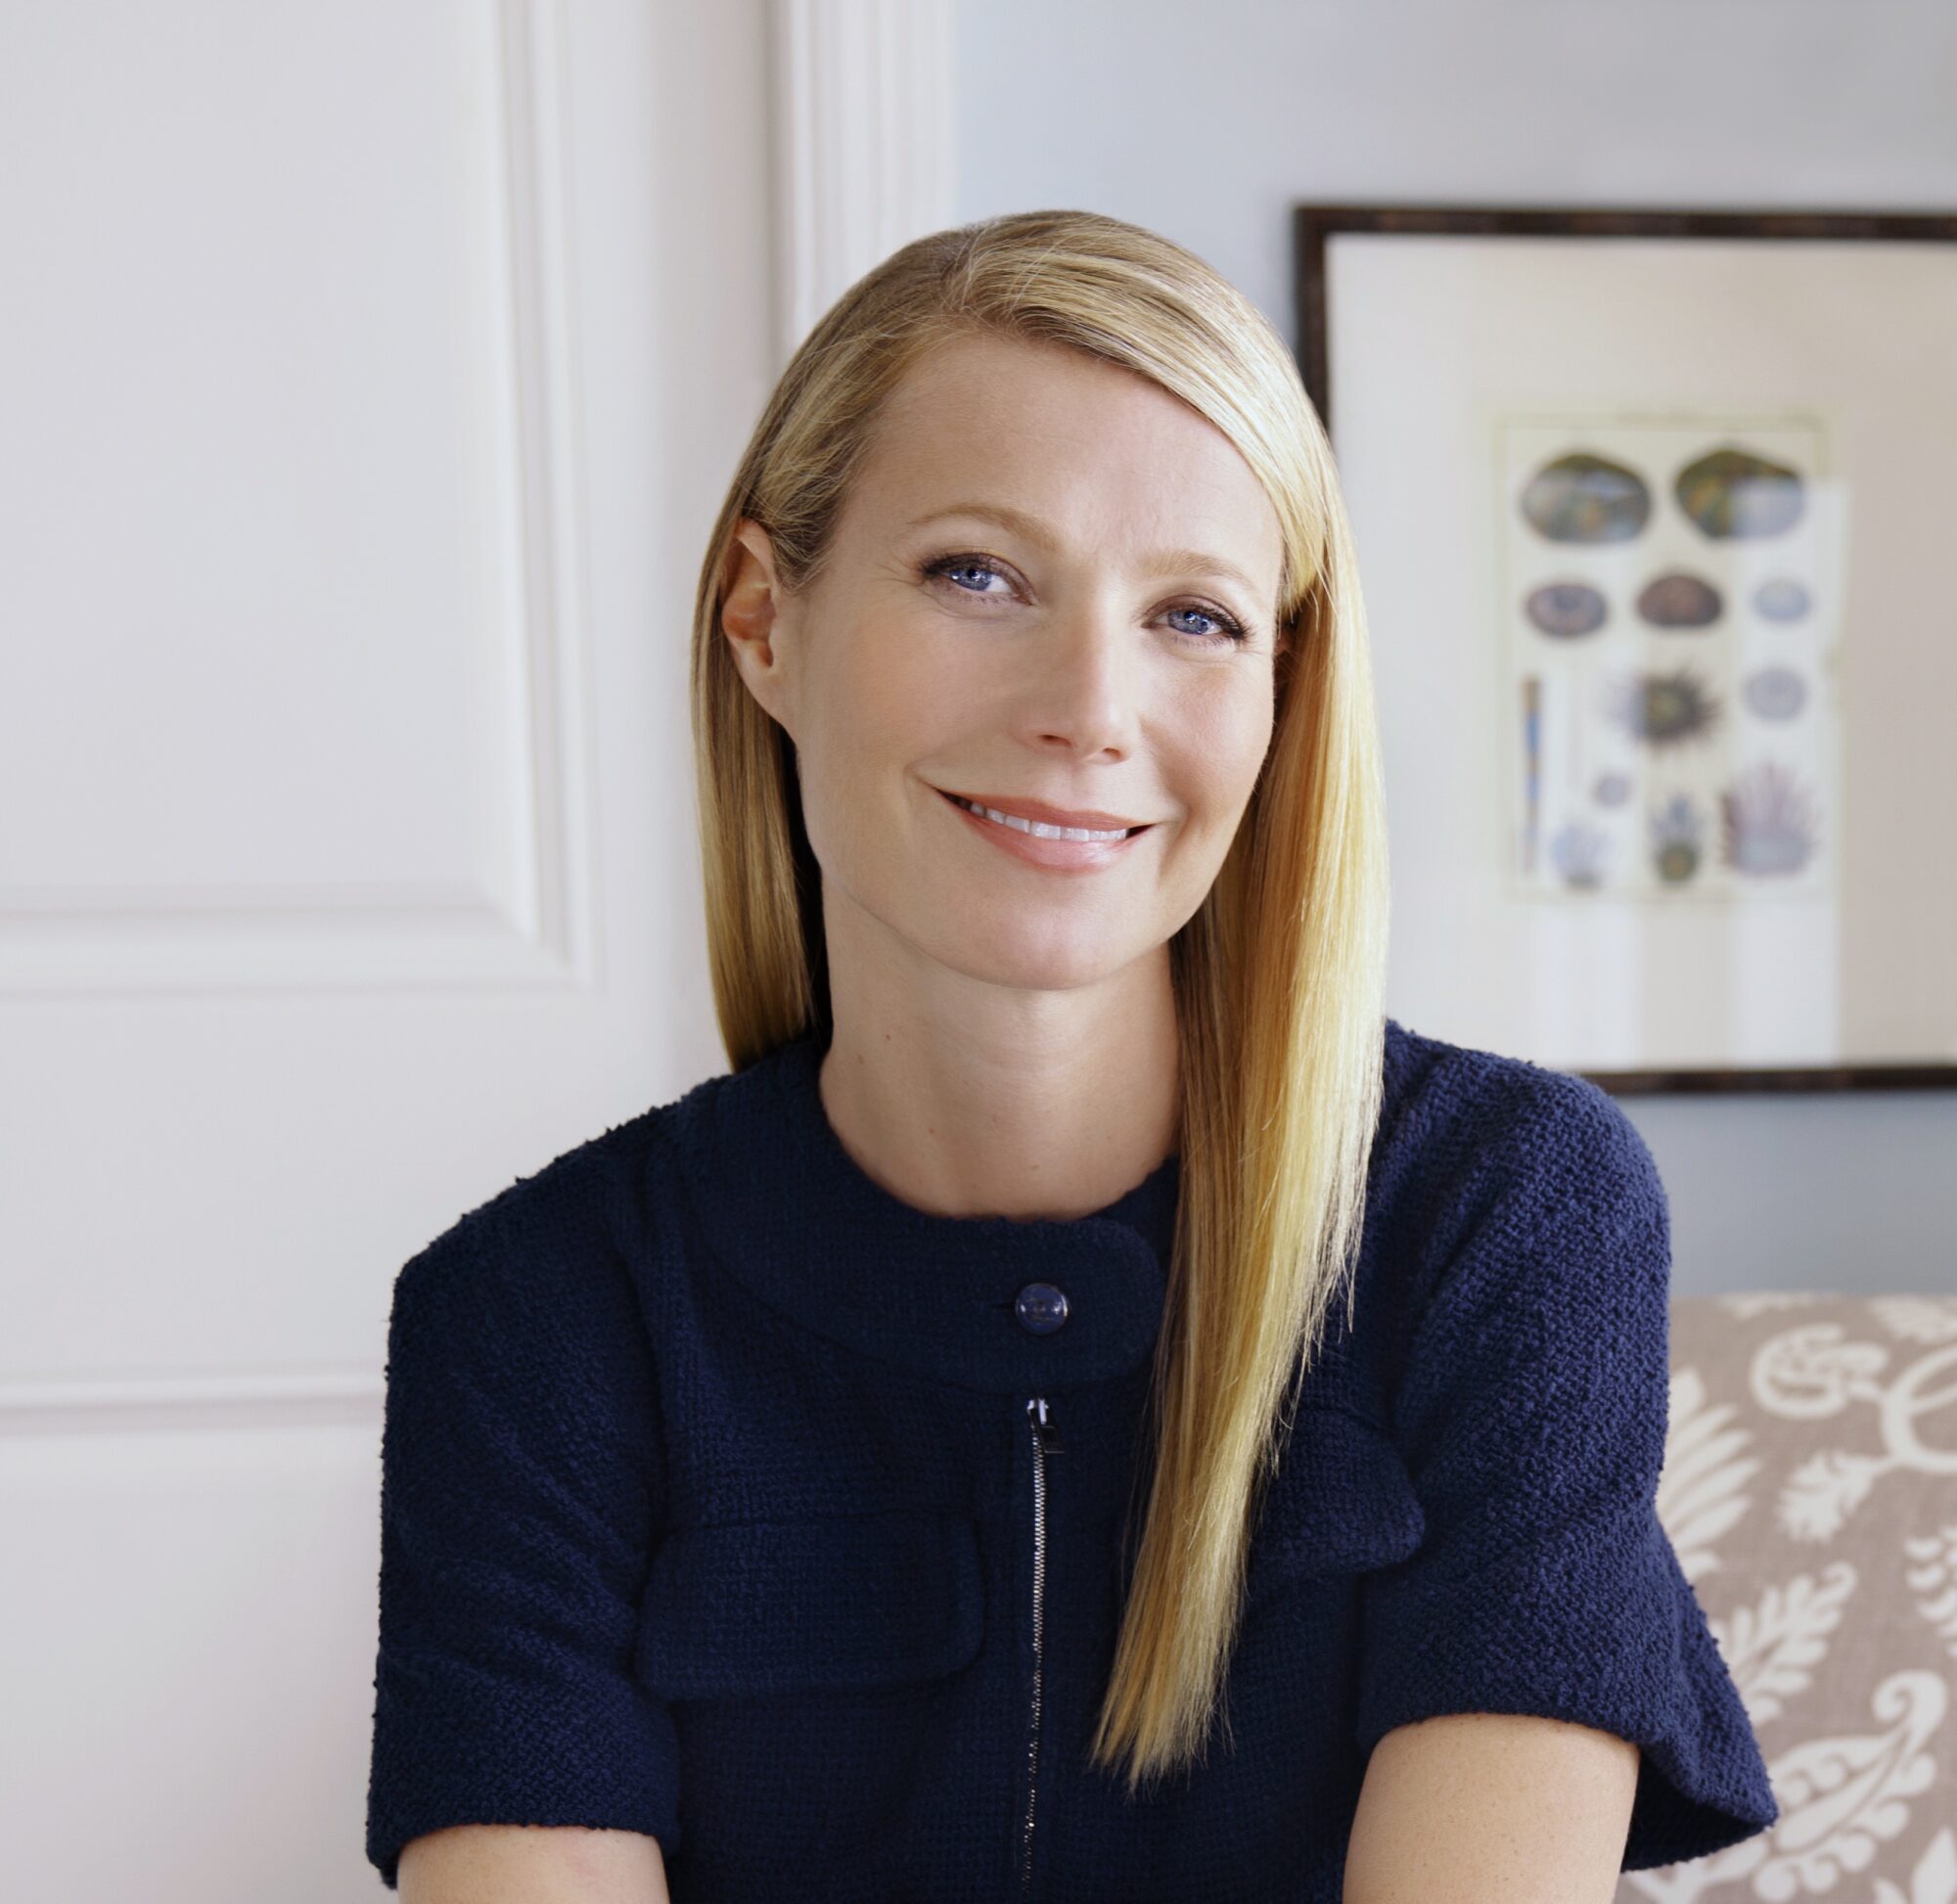 Actress and founder of Goop Gwyneth Paltrow (Photo by Jay L. Clendenin/Contour by Getty Images)